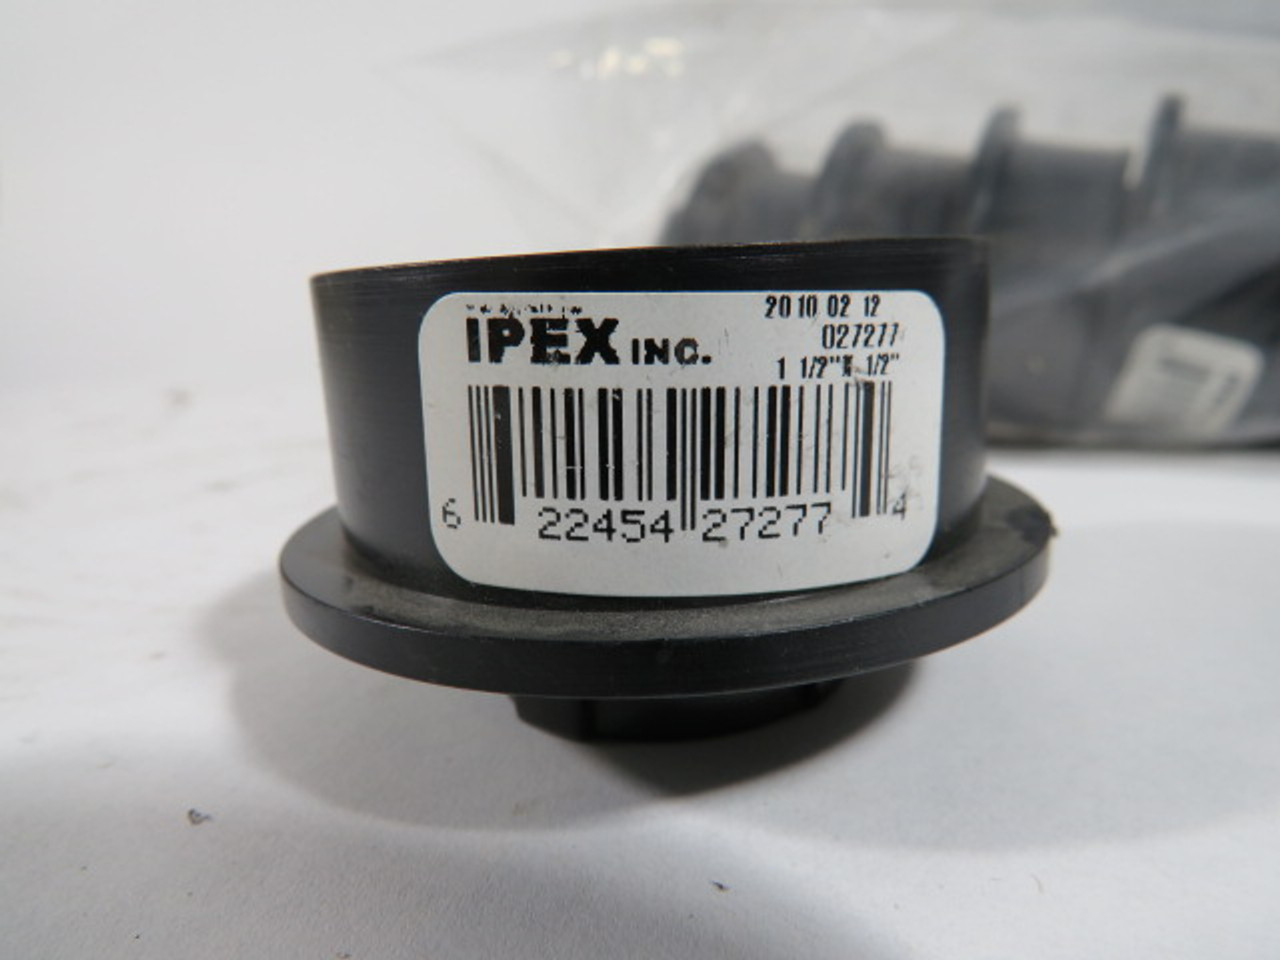 Ipex 027277 ABS Dishwasher Adapter 1-1/2"x1/2" Lot of 10 ! NOP !